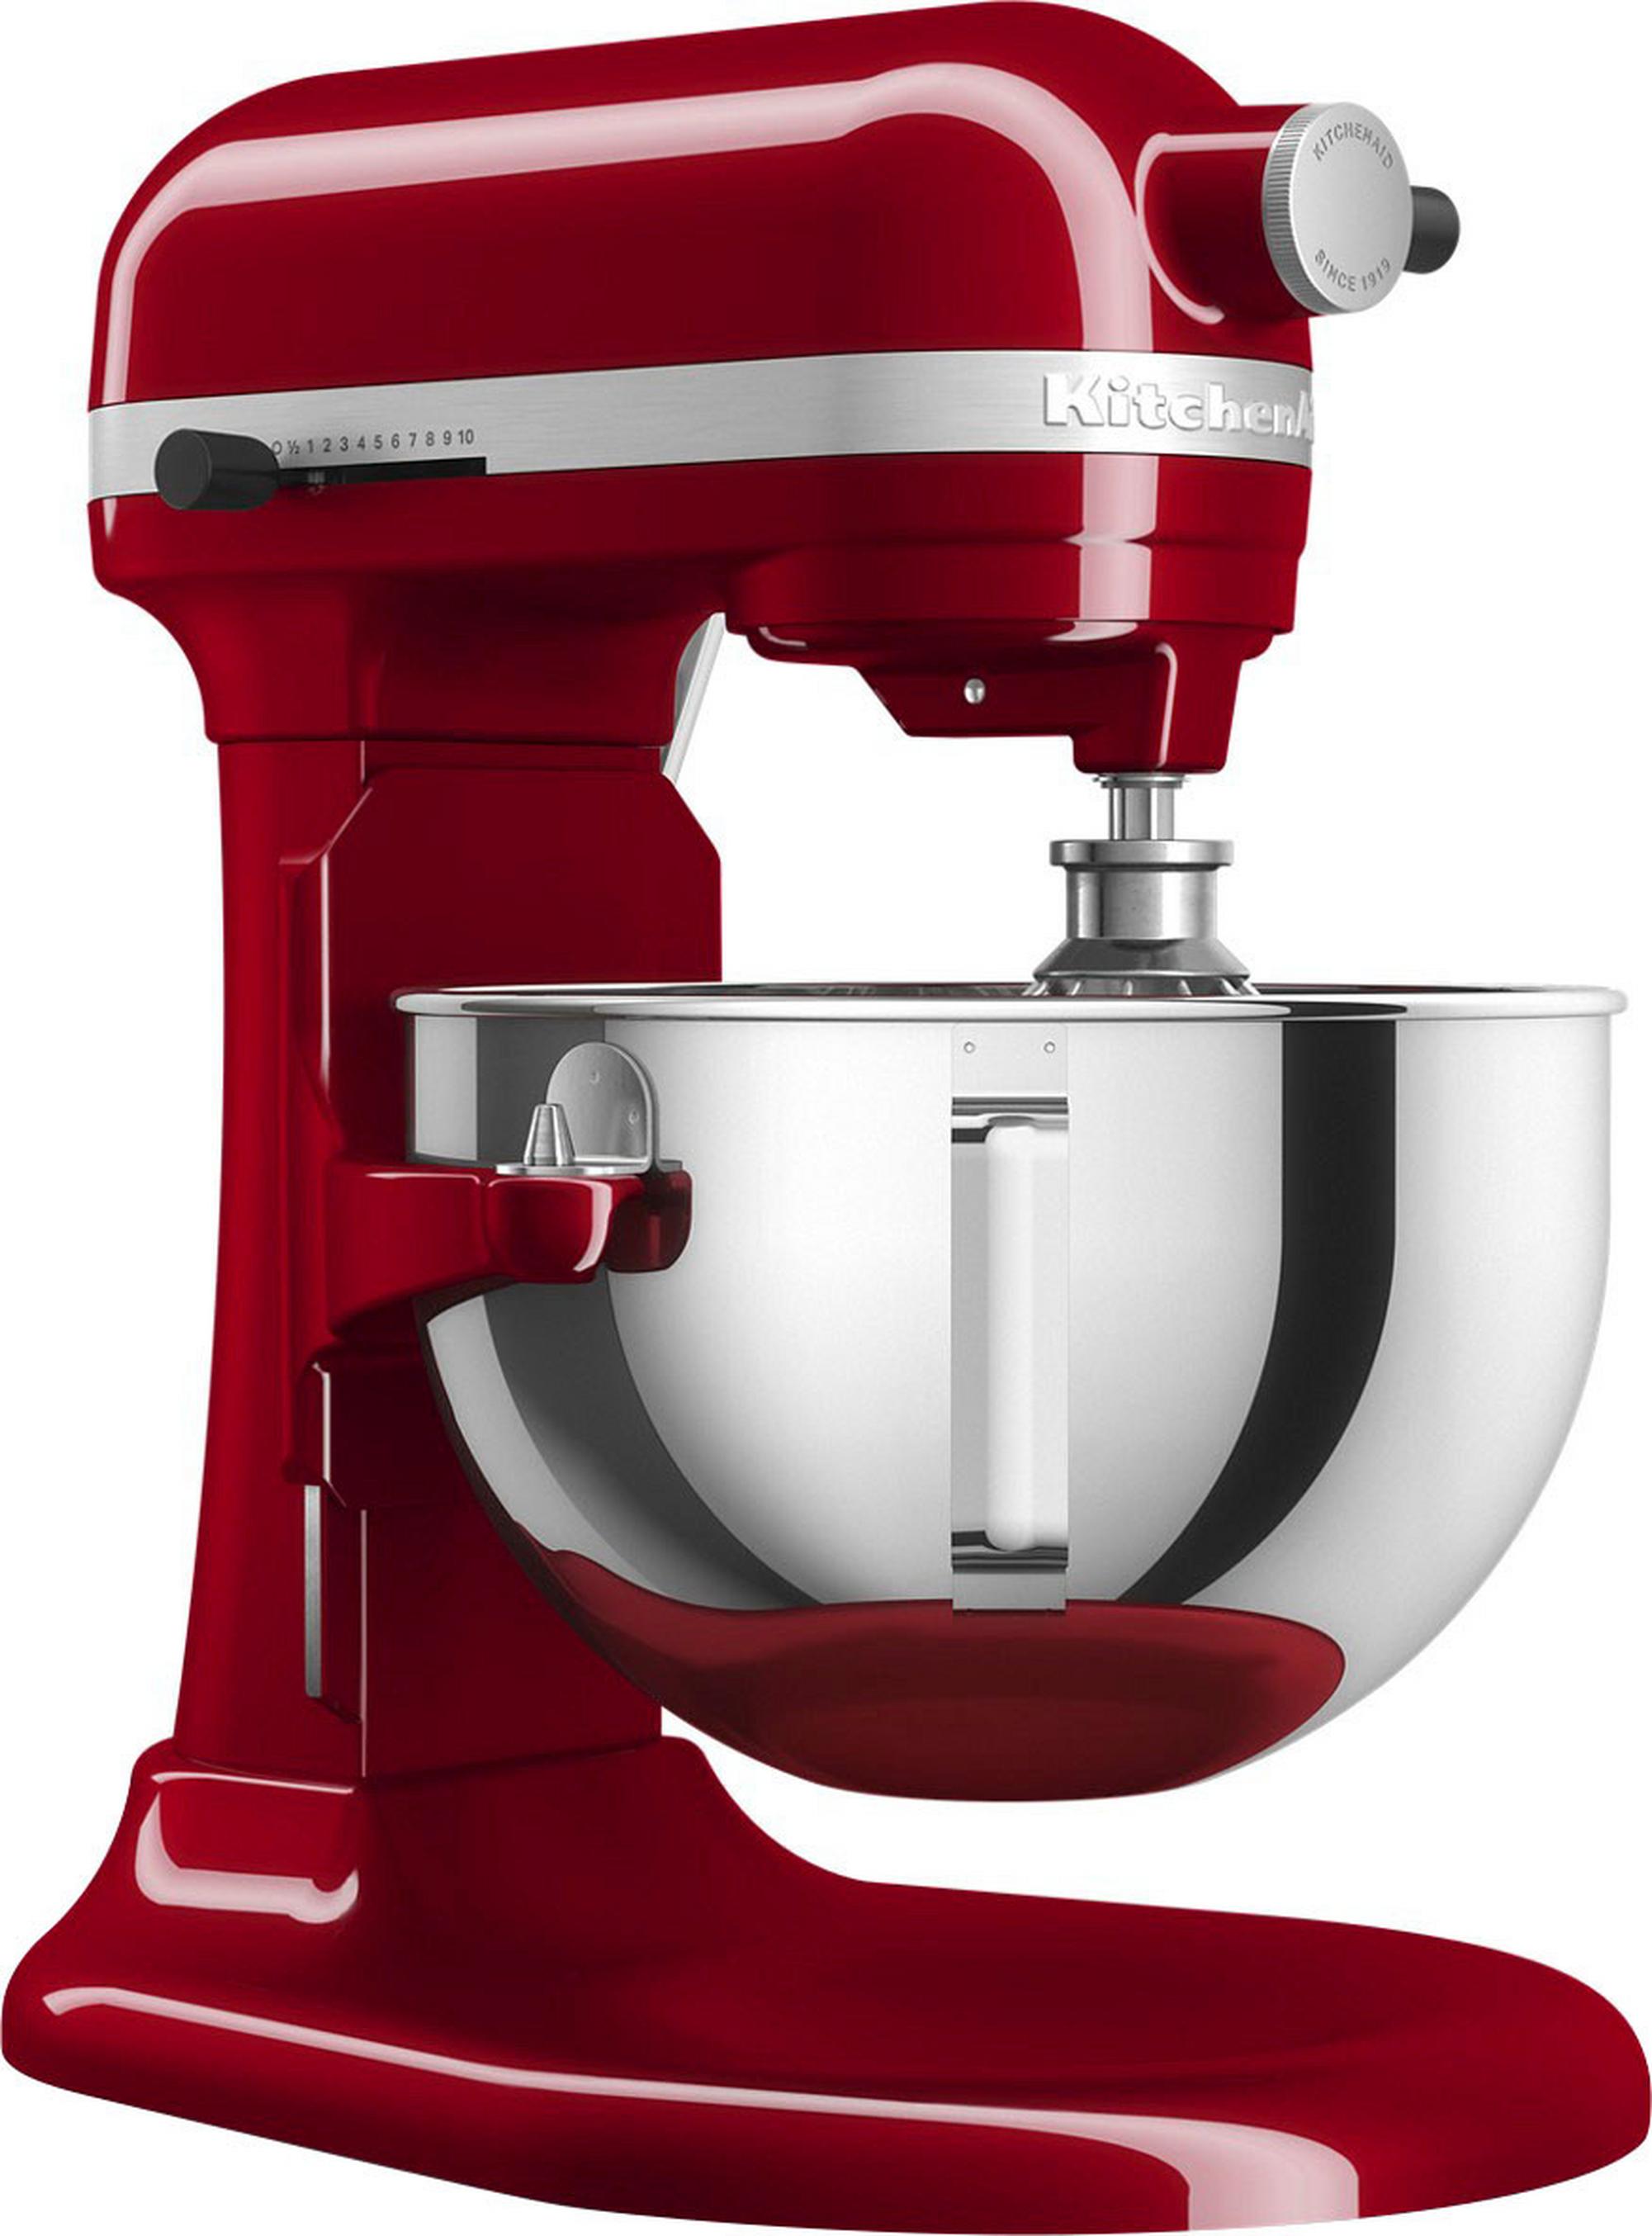 https://i8.amplience.net/i/aarons/6416443/KitchenAid%205.5%20Quart%20Bowl-Lift%20Stand%20Mixer%20-%20Empire%20Red?$large$